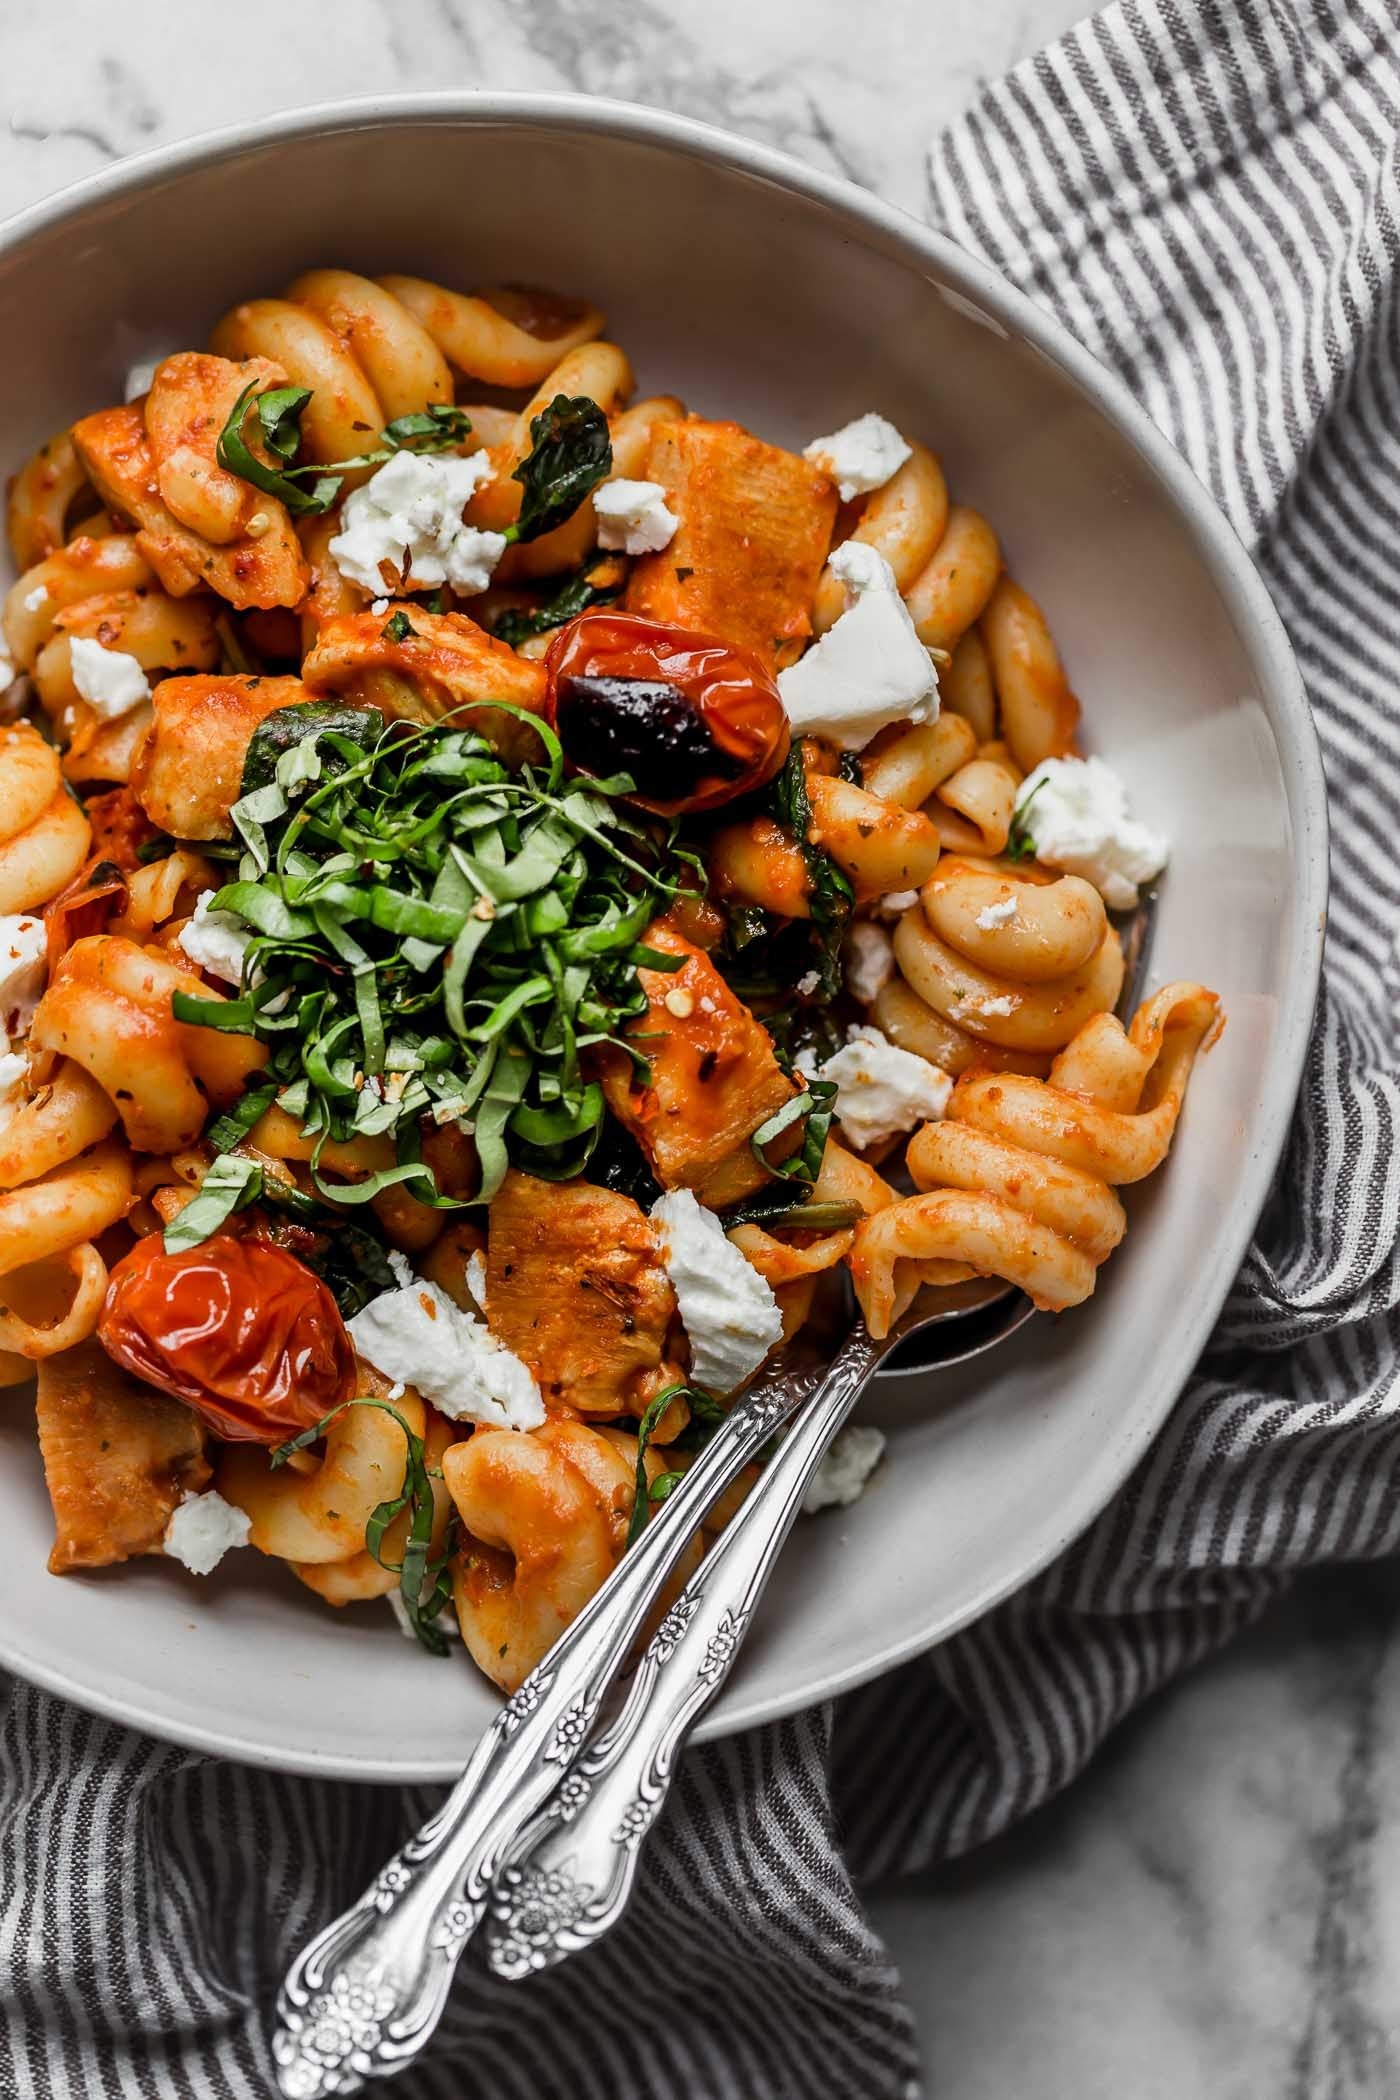 Pasta with chicken, blistered tomato, cheese, and torn basil